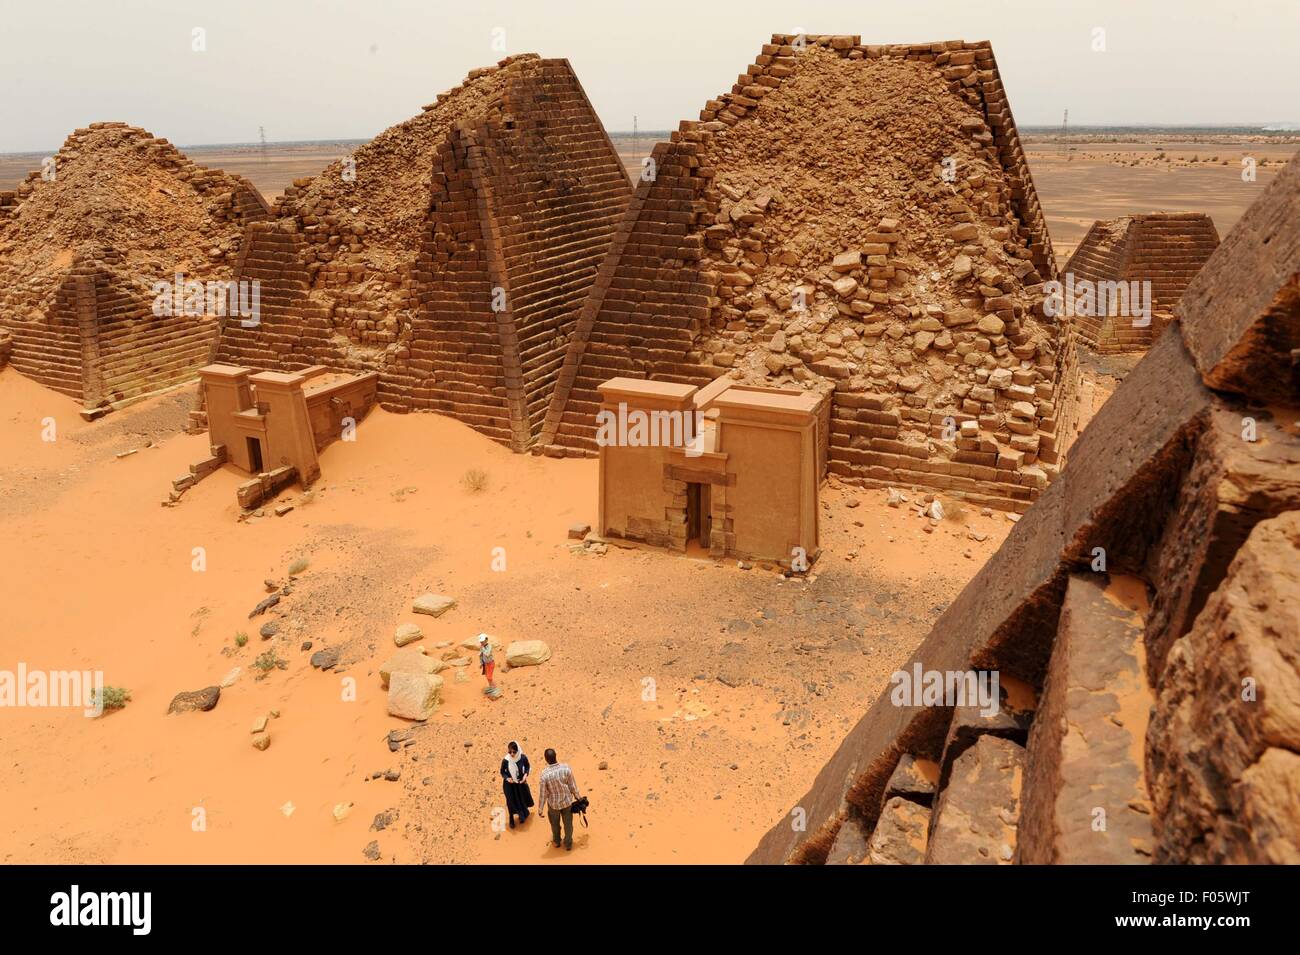 Khartoum. 7th Aug, 2015. Photo taken on Aug. 7, 2015 shows Meroe Pyramids to tourist in Meroe, 250km north of Khartoum, capital of Sudan. The Archaeological Sites of the Island of Meroe, a semi-desert landscape between the Nile and Atbara rivers, was the heartland of the Kingdom of Kush, a major power from the 8th century B.C. to the 4th century A.D. The property consists of the royal city of the Kushite kings at Meroe, near the River Nile, the nearby religious site of Naqa and Musawwarat es Sufra. © Li Ziheng/Xinhua/Alamy Live News Stock Photo